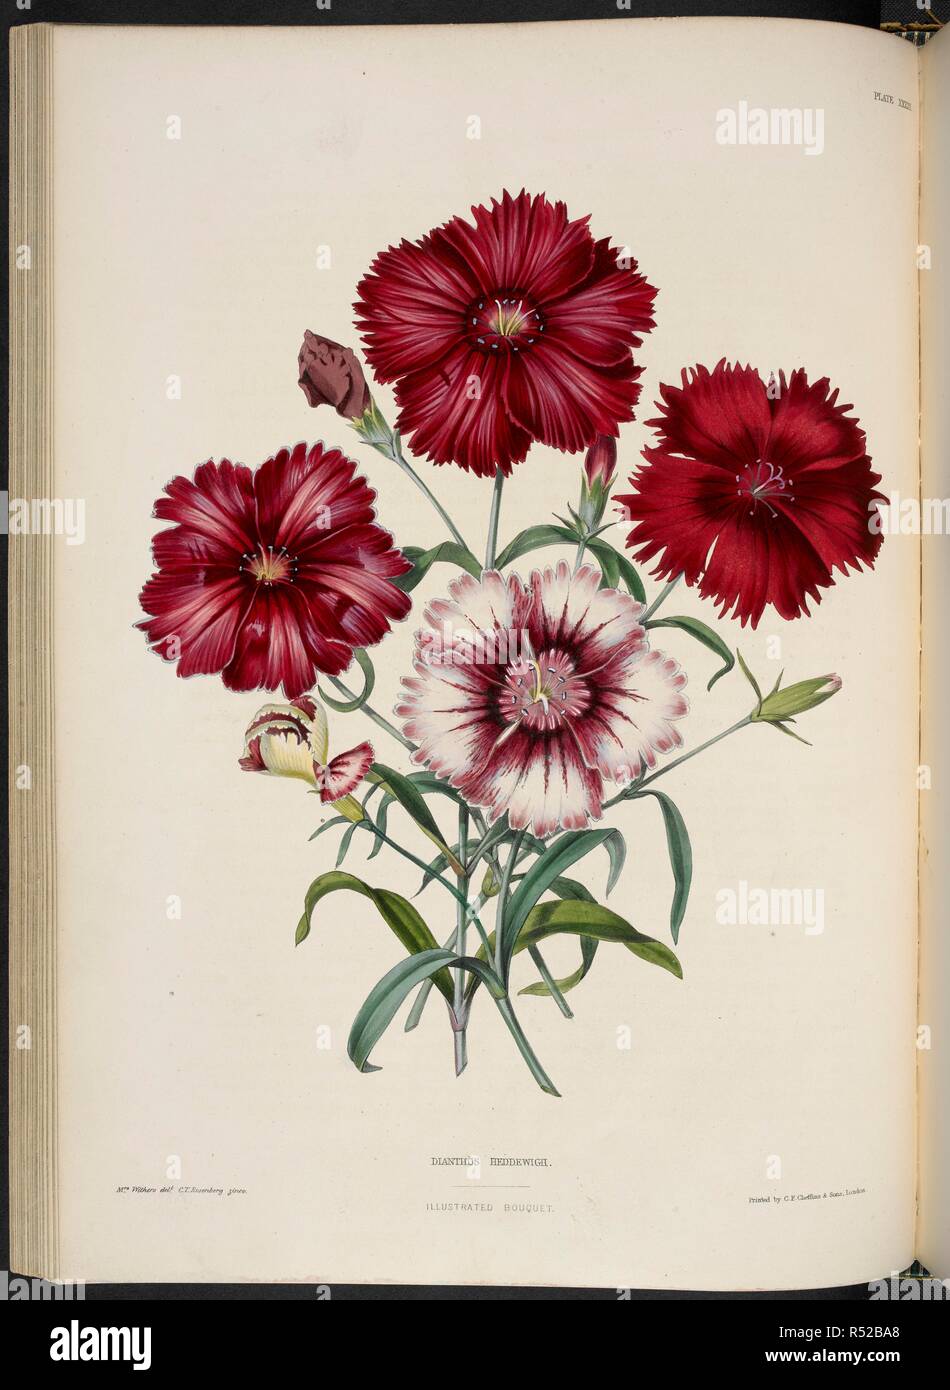 Dianthus sinensis, var. Heddewigii. Dianthus chinensis (China pink.) Dianthus Heddewigii. . The Illustrated Bouquet, consisting of figures, with descriptions of new flowers. London, 1857-64. Source: 1823.c.13 plate 33. Author: Henderson, Edward George. Withers, Mrs. Stock Photo